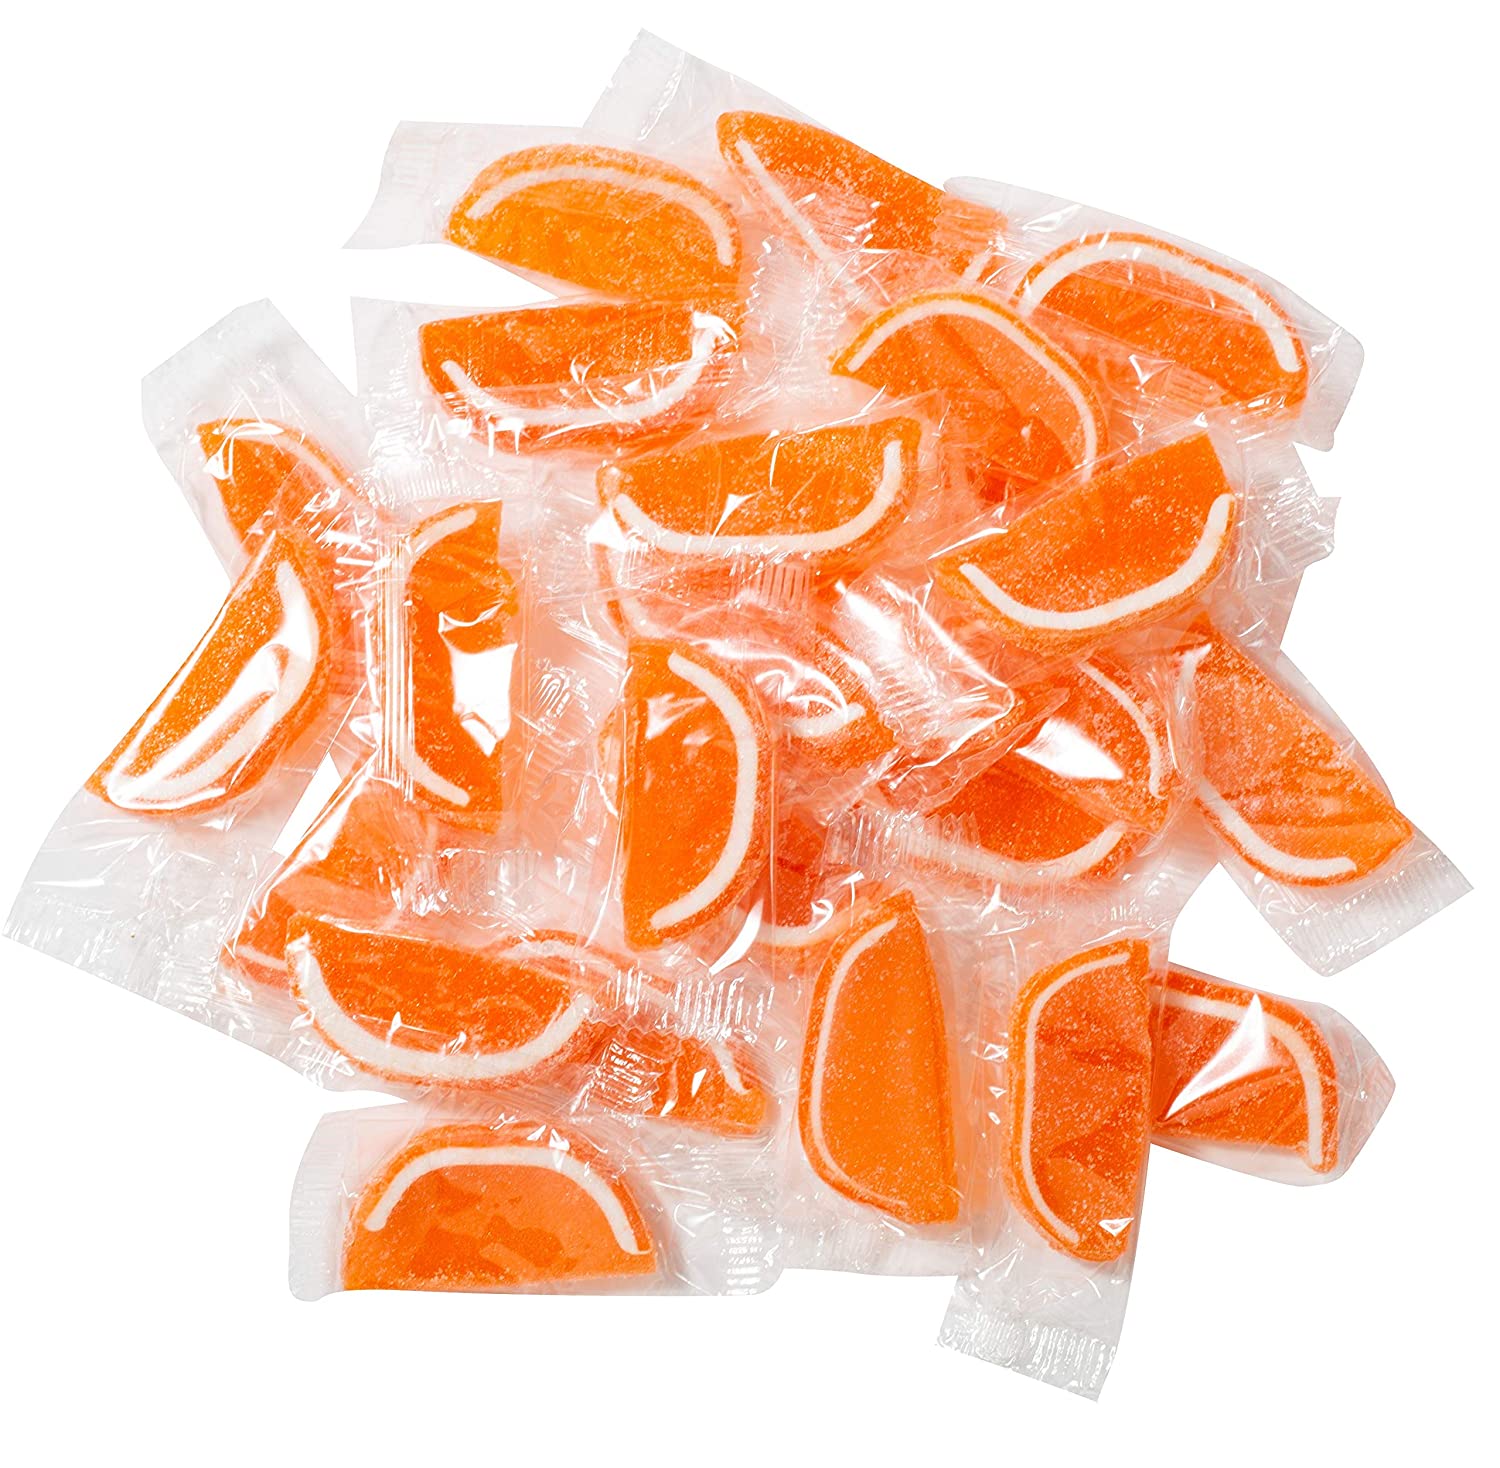 Boston Fruit Slices Sugar Free Fruit Slices 5 oz (142g) by Boston Fruit  Slices - Exclusive Offer at $4.49 on Netrition